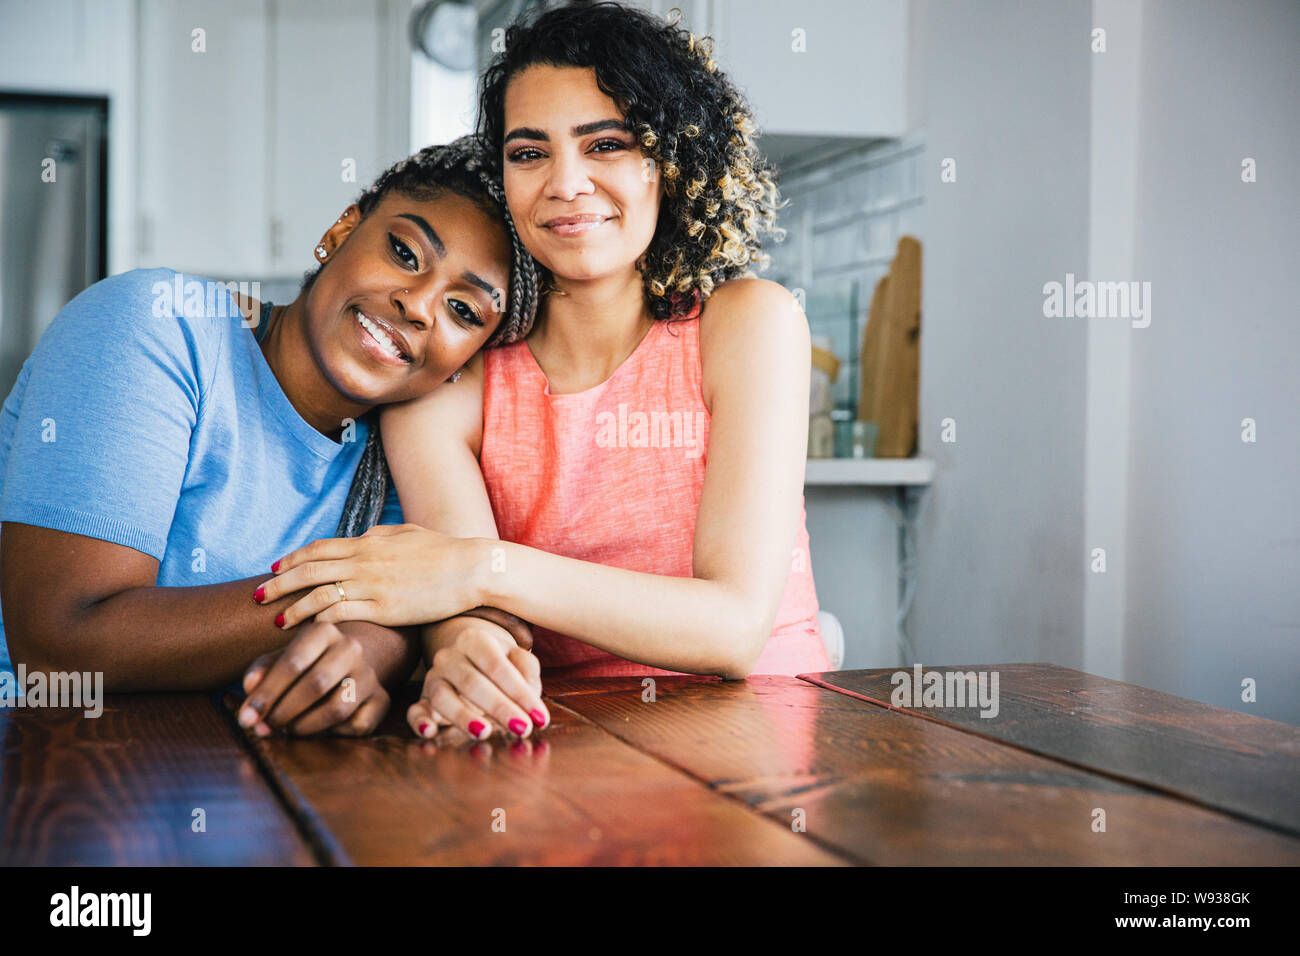 Portrait of smiling senior couple sitting at table Banque D'Images